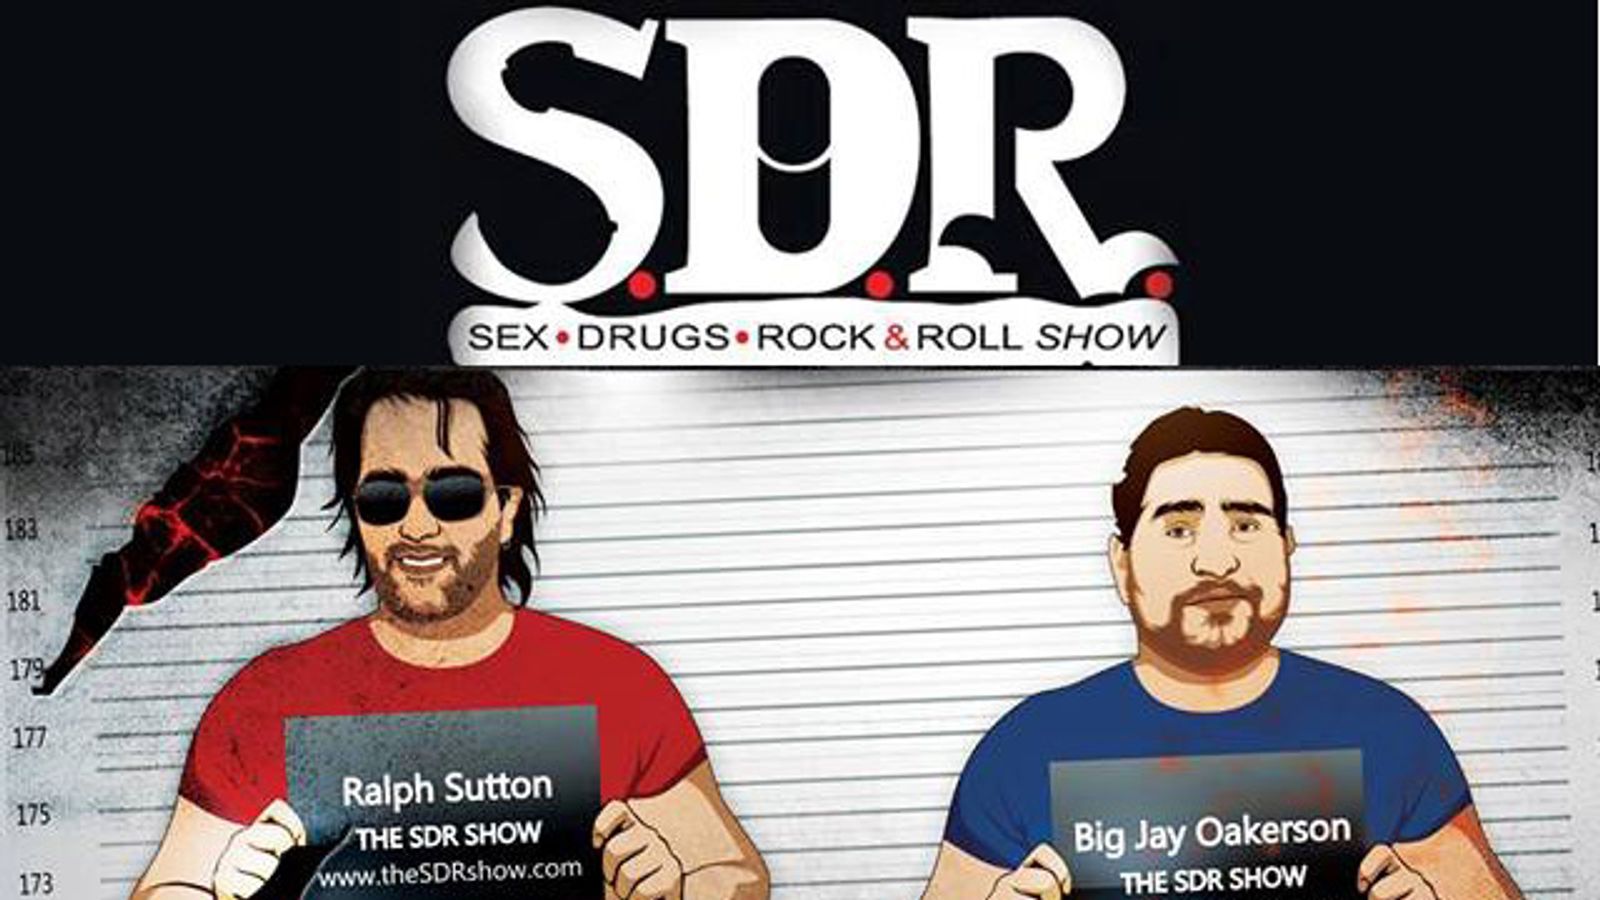 'The SDR Show' Announces Open Call for Adult Entertainers